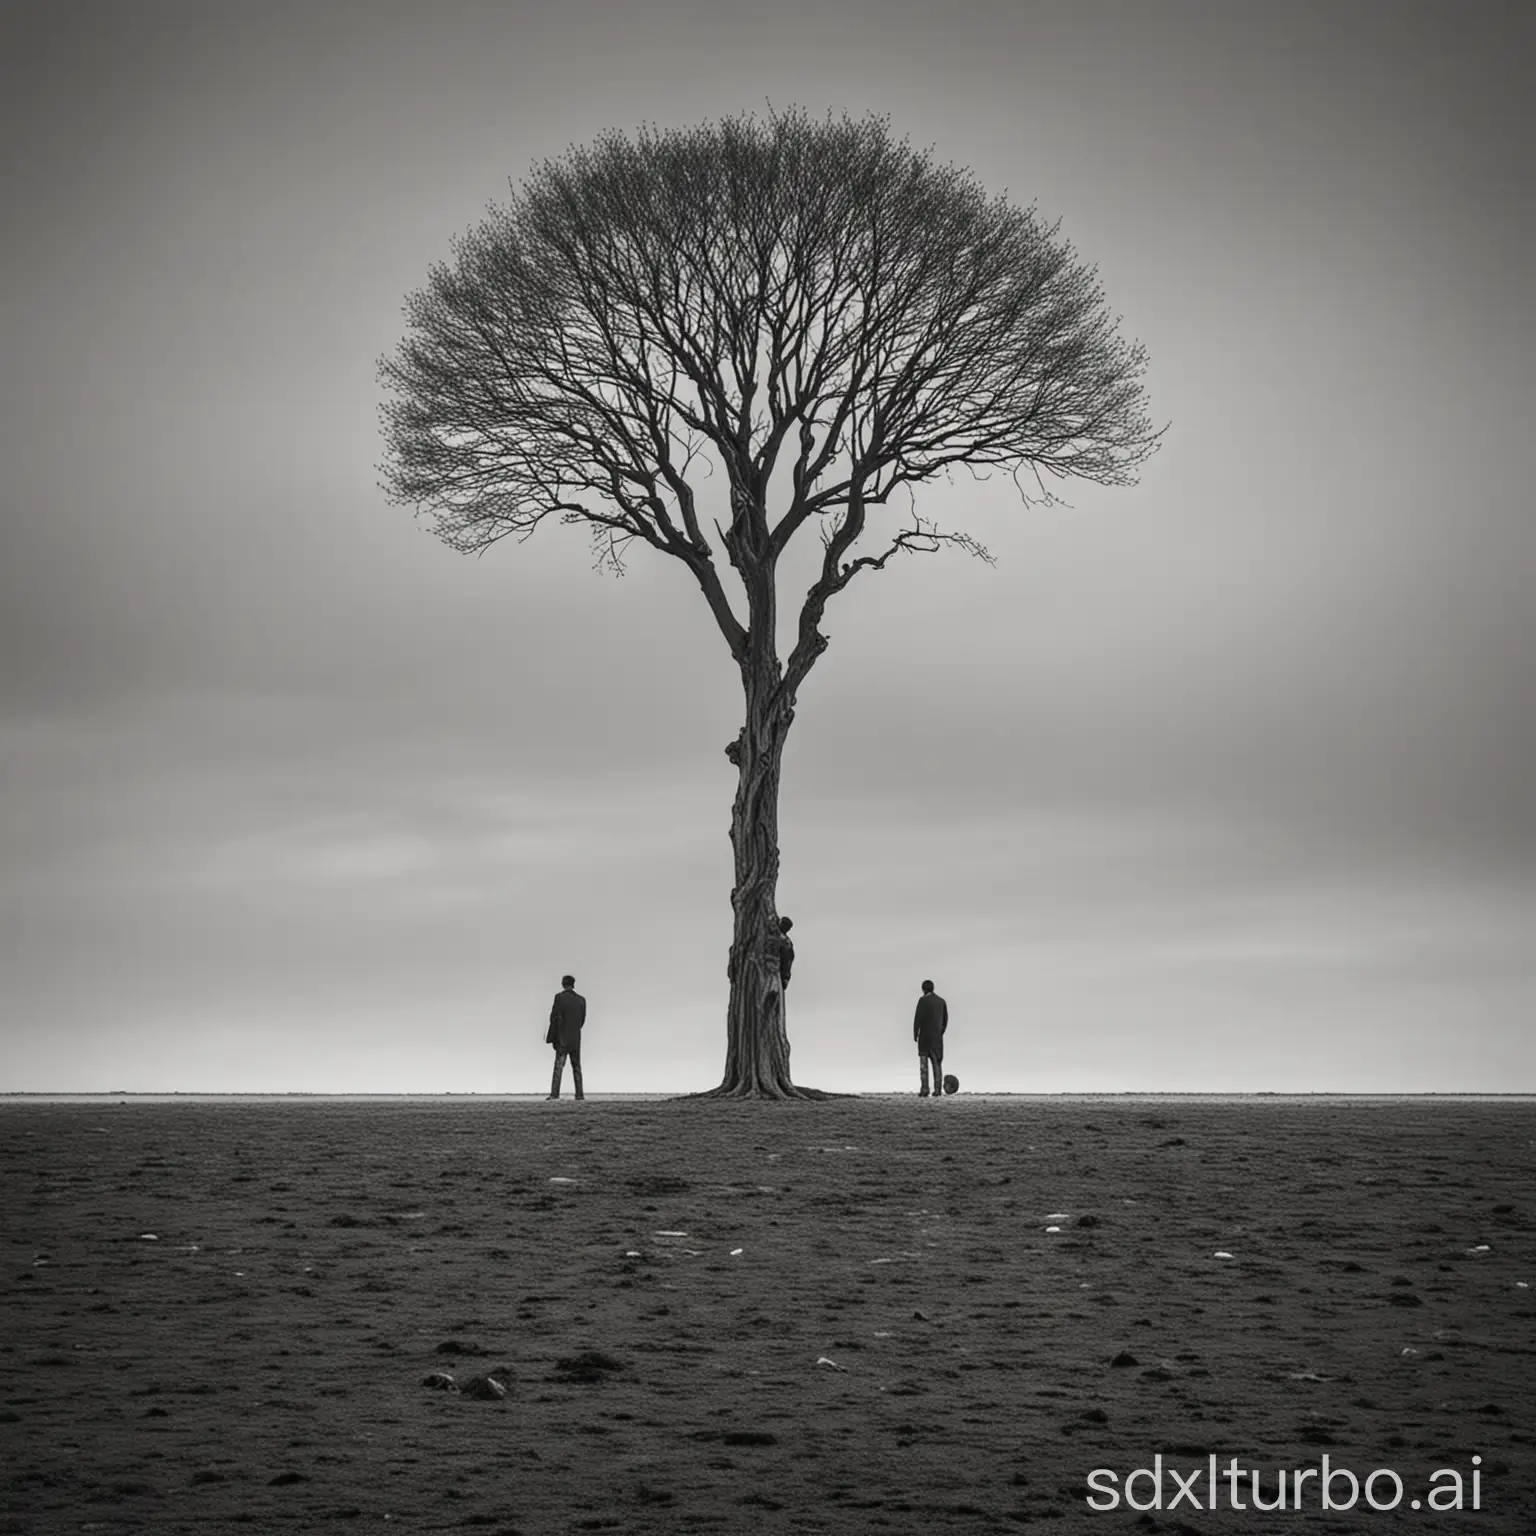 Solitary-Men-Standing-by-Bare-Tree-in-Desolate-Landscape